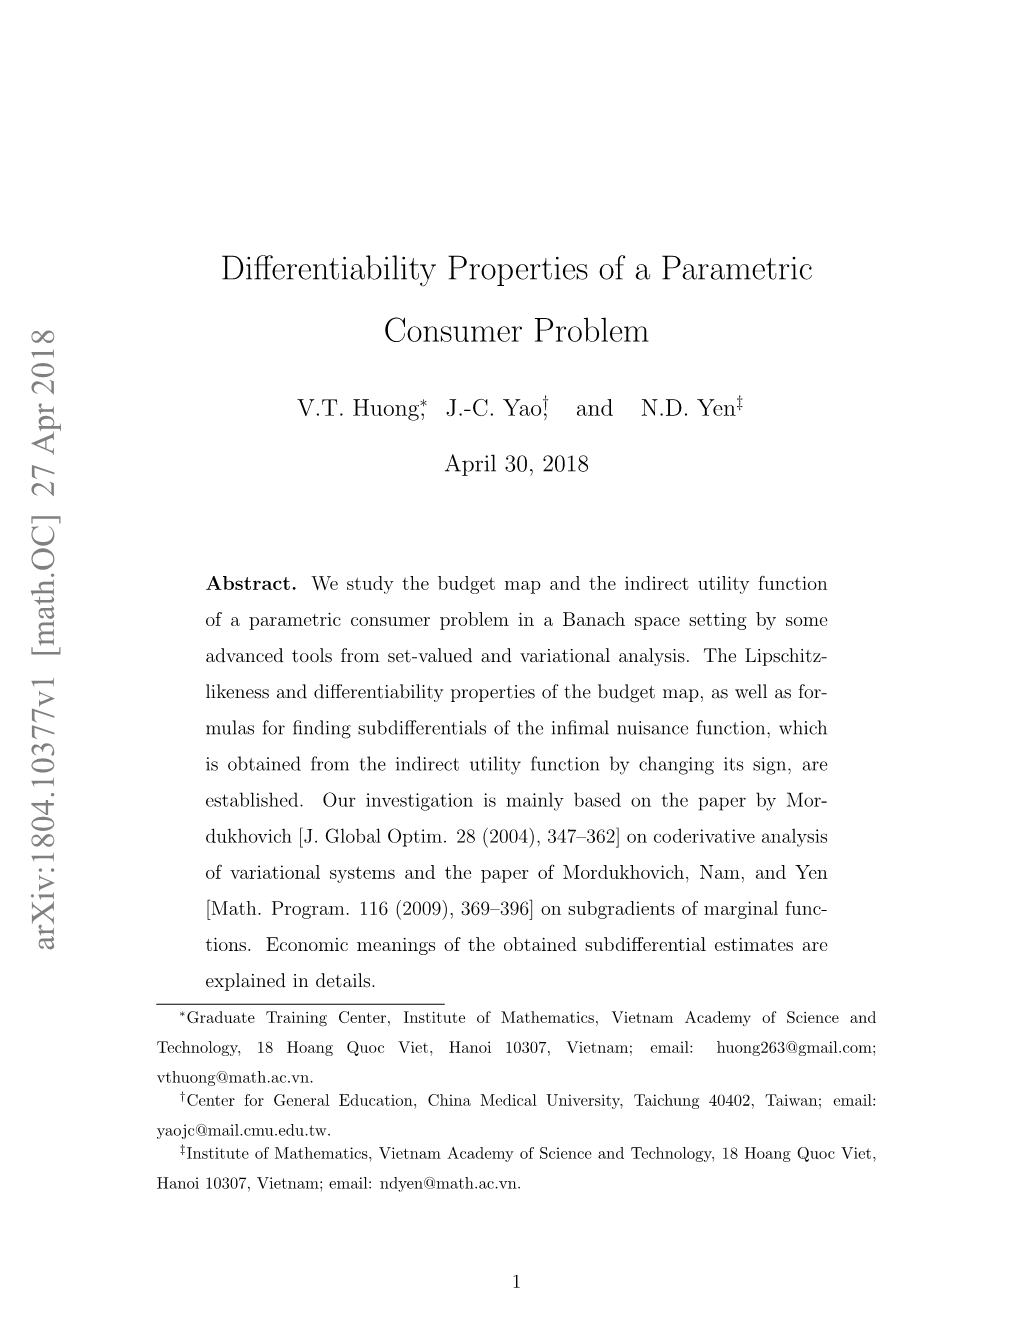 Differentiability Properties of a Parametric Consumer Problem